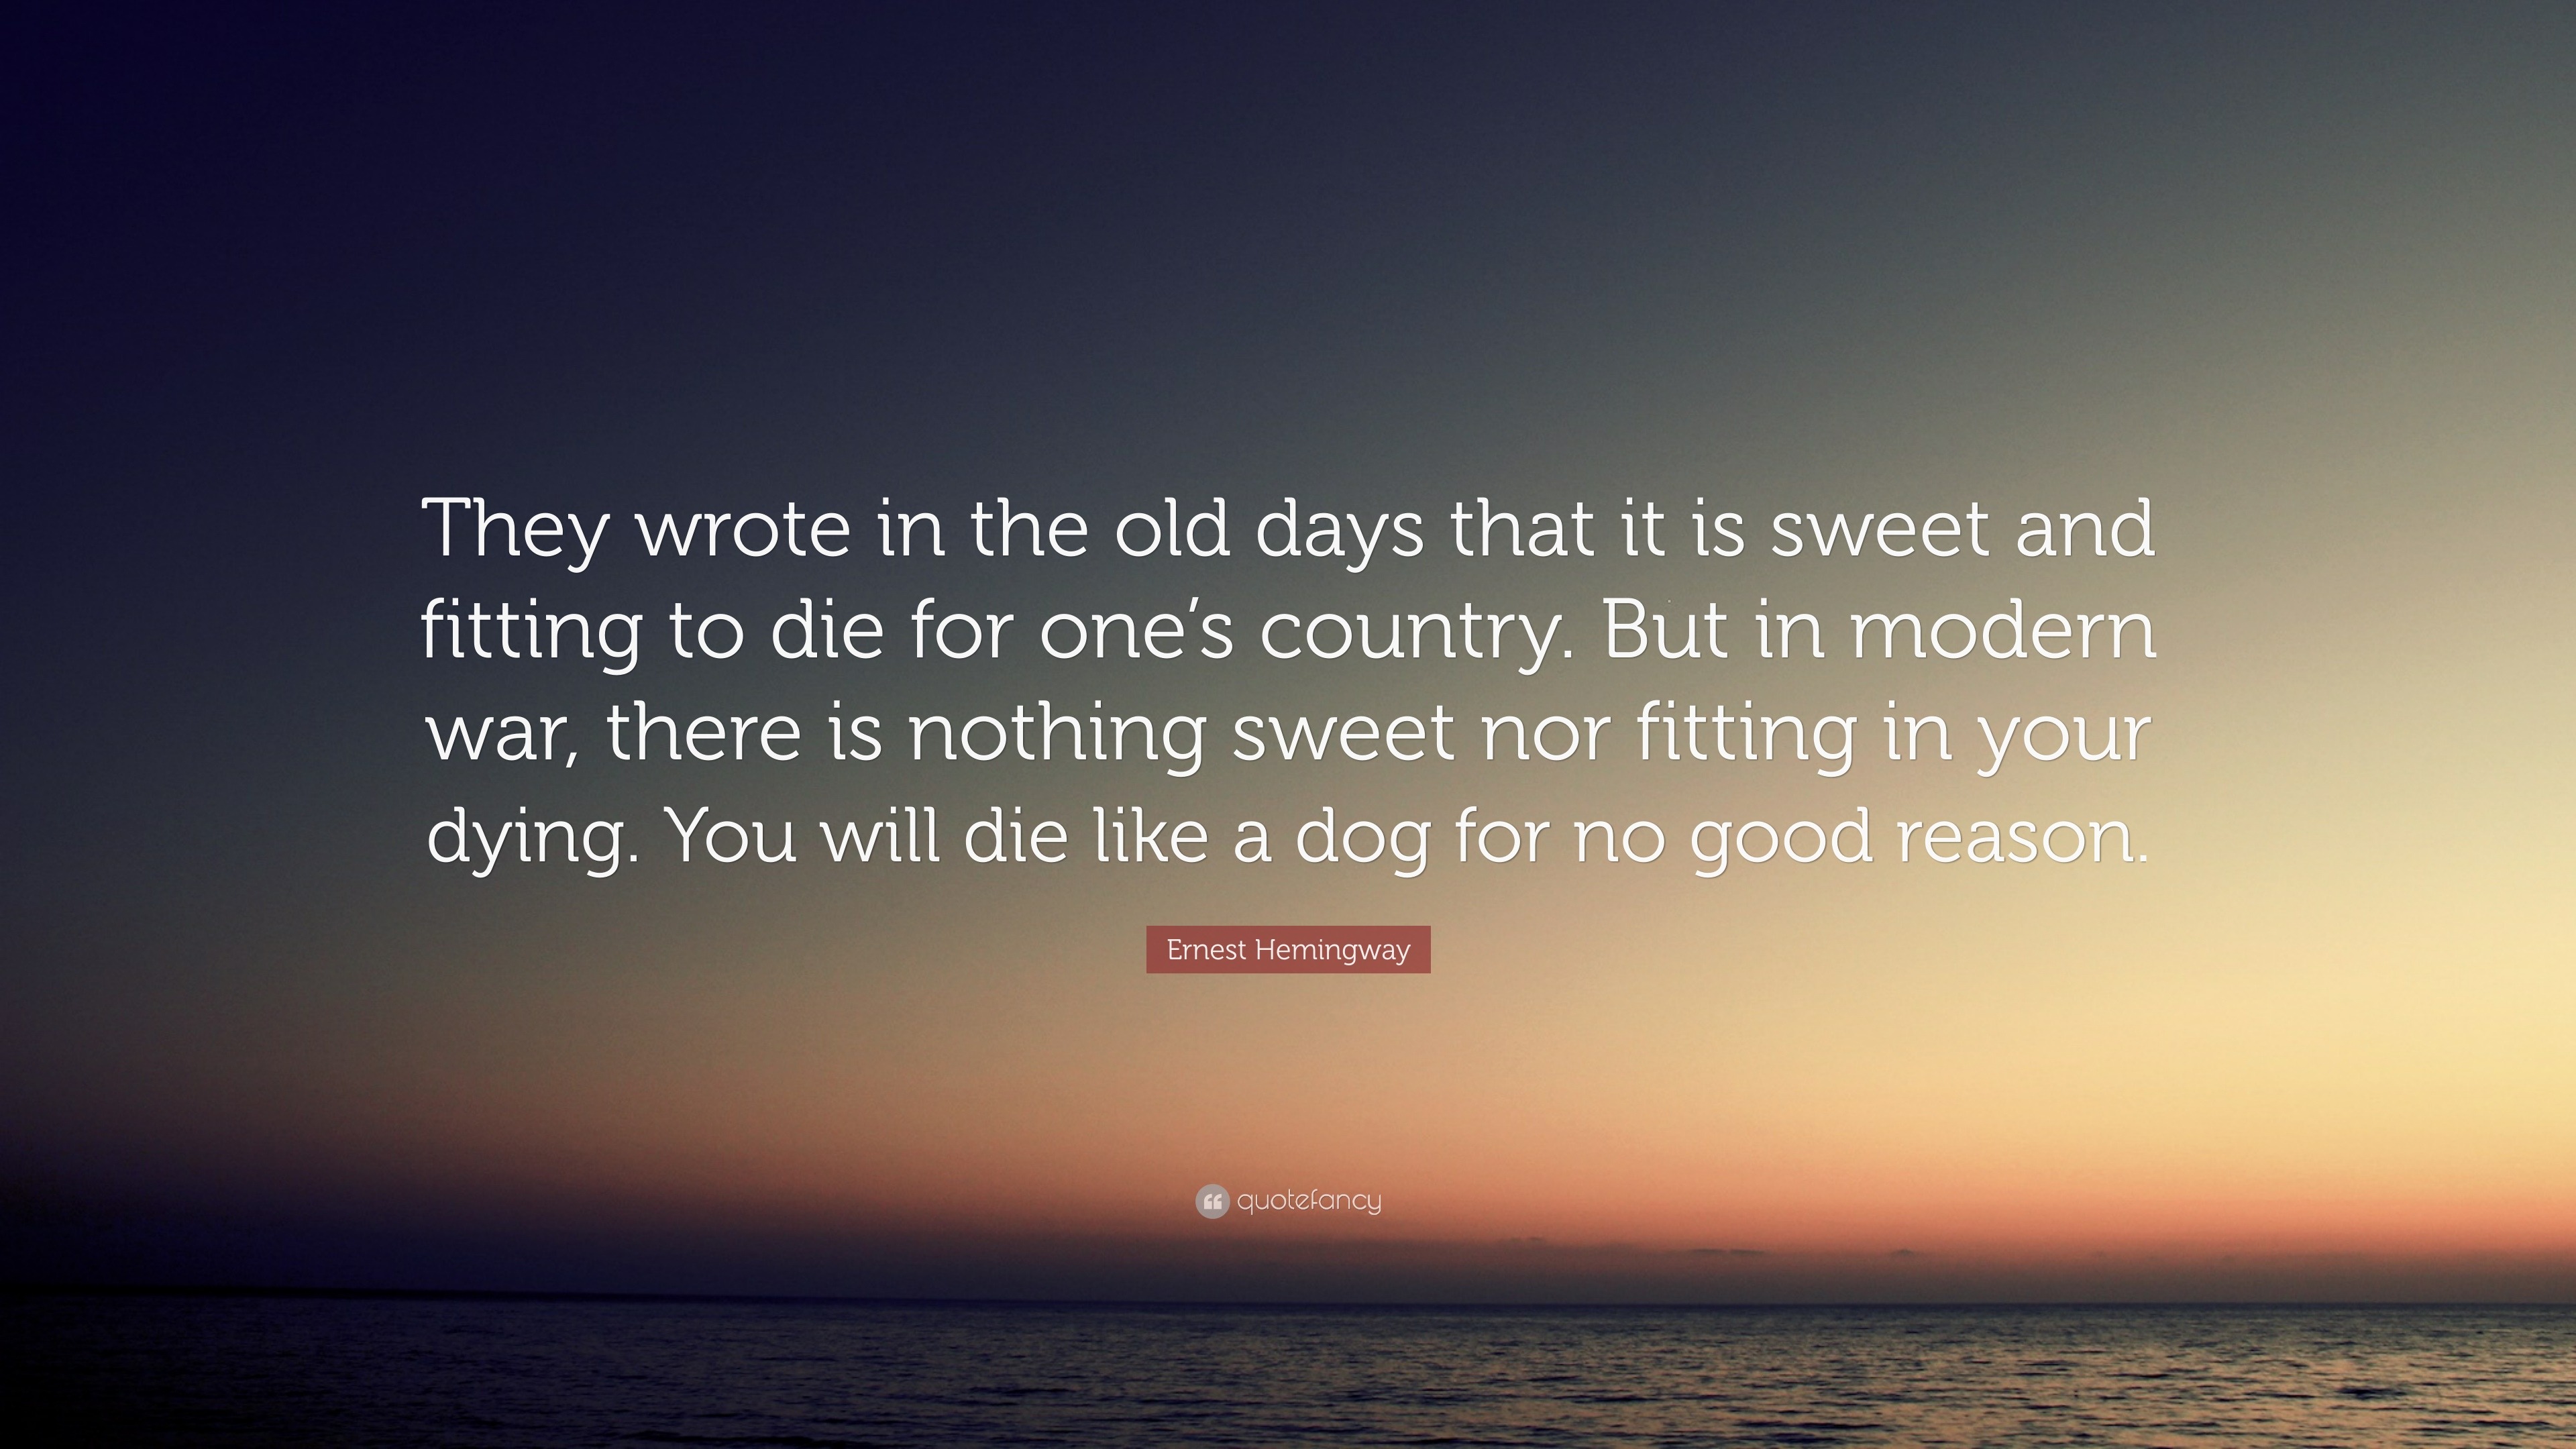 Ernest Hemingway Quote: “They wrote in the old days that it is sweet ...